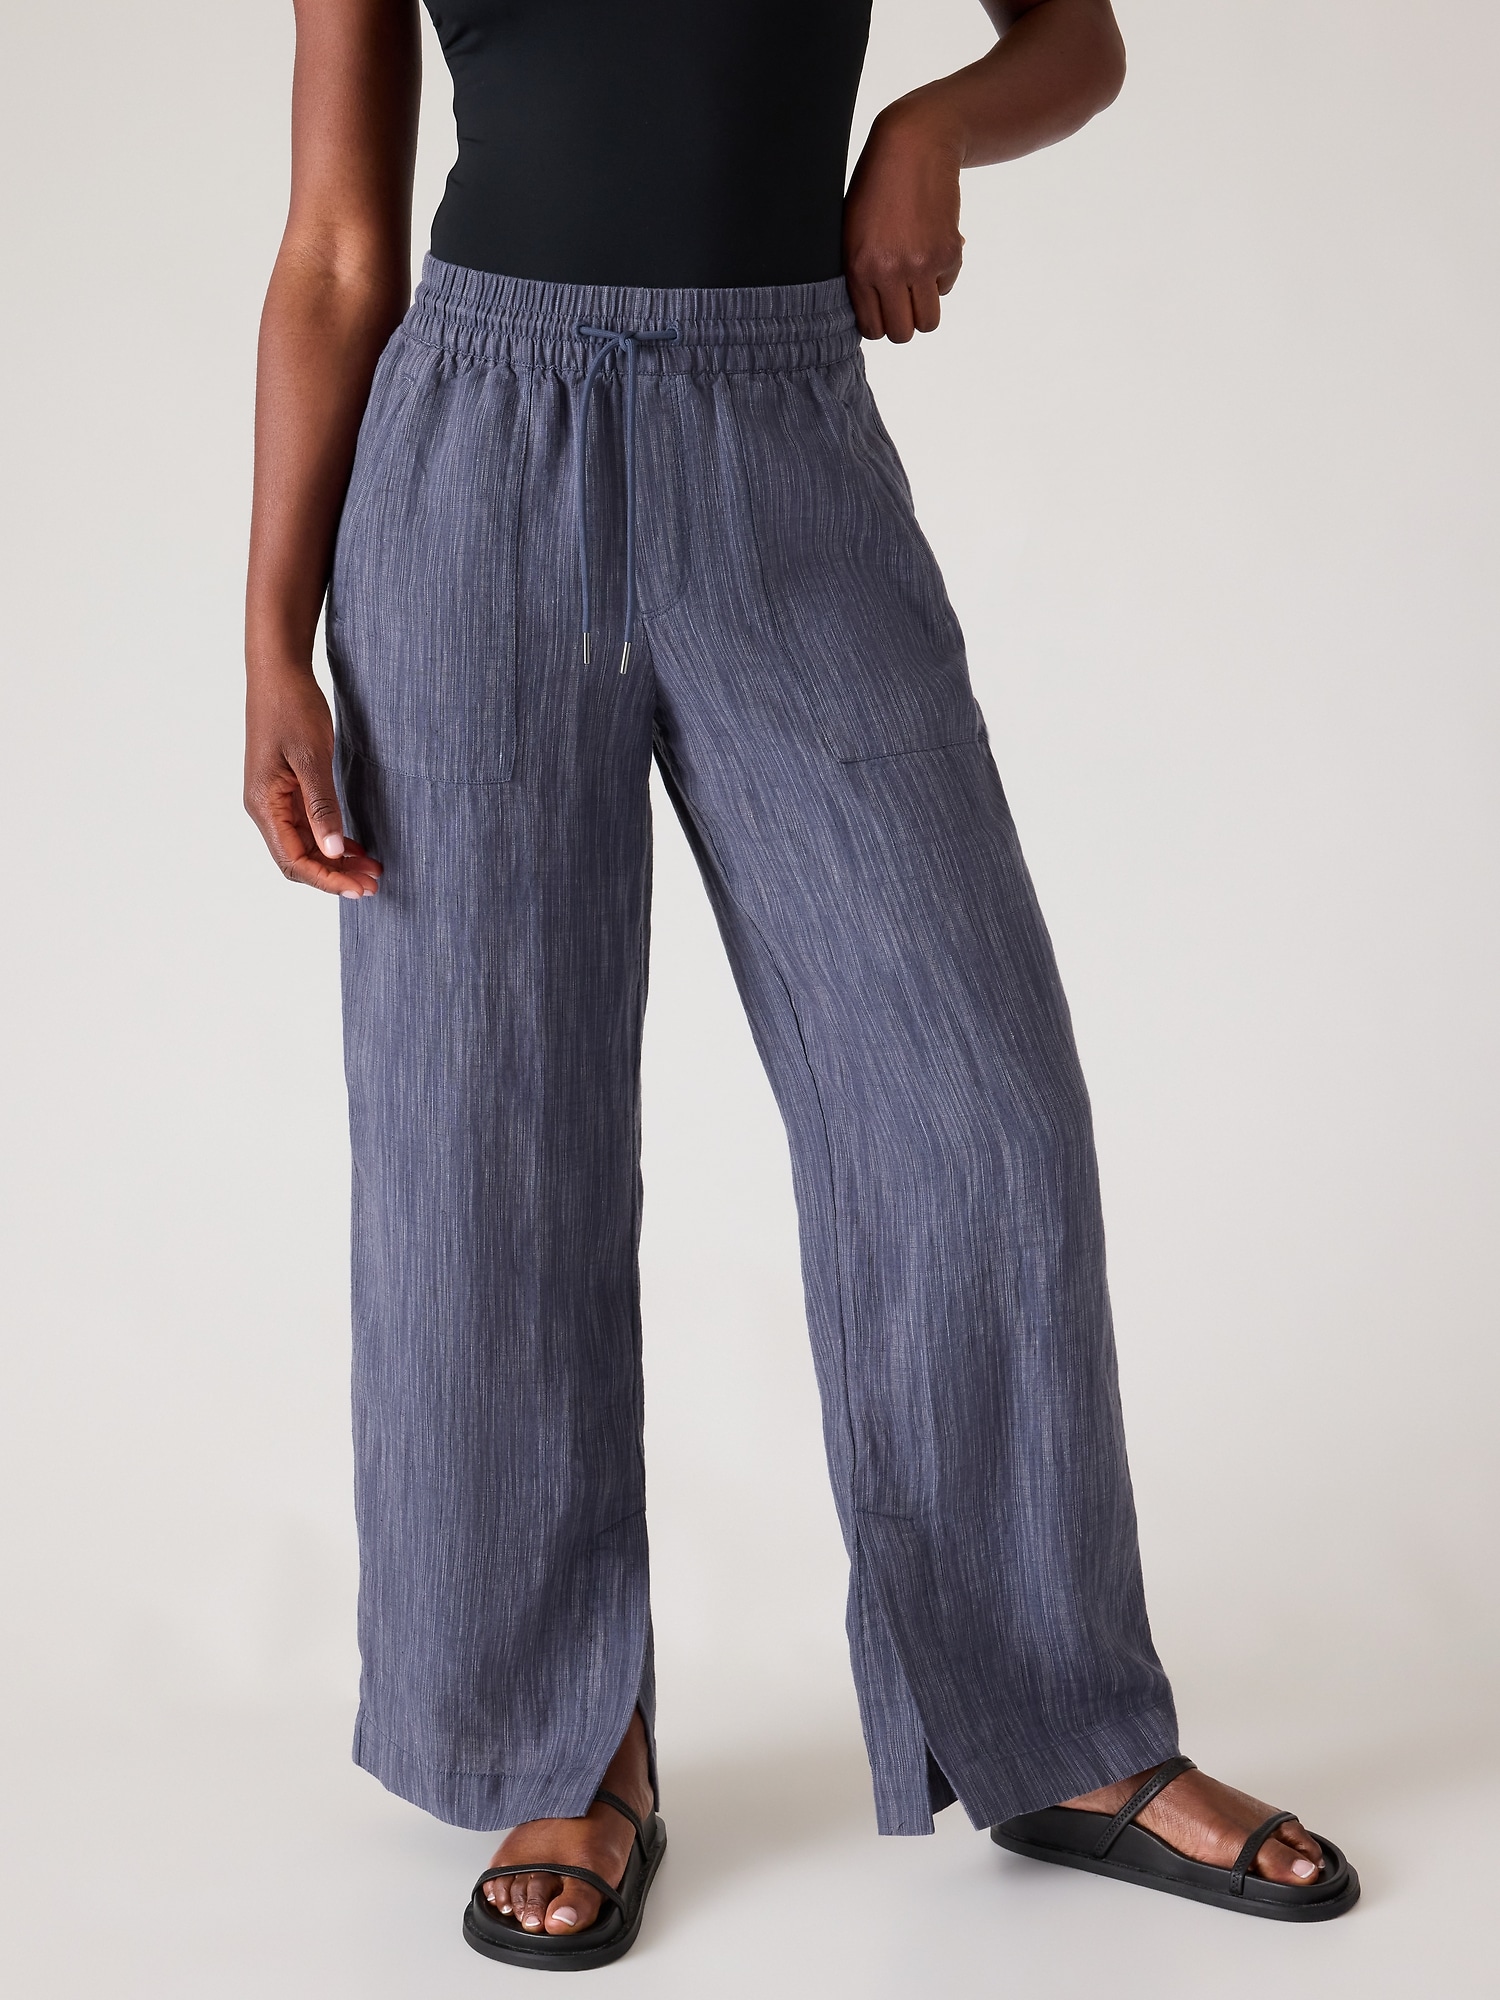 Styling Linen Pants From Athleta